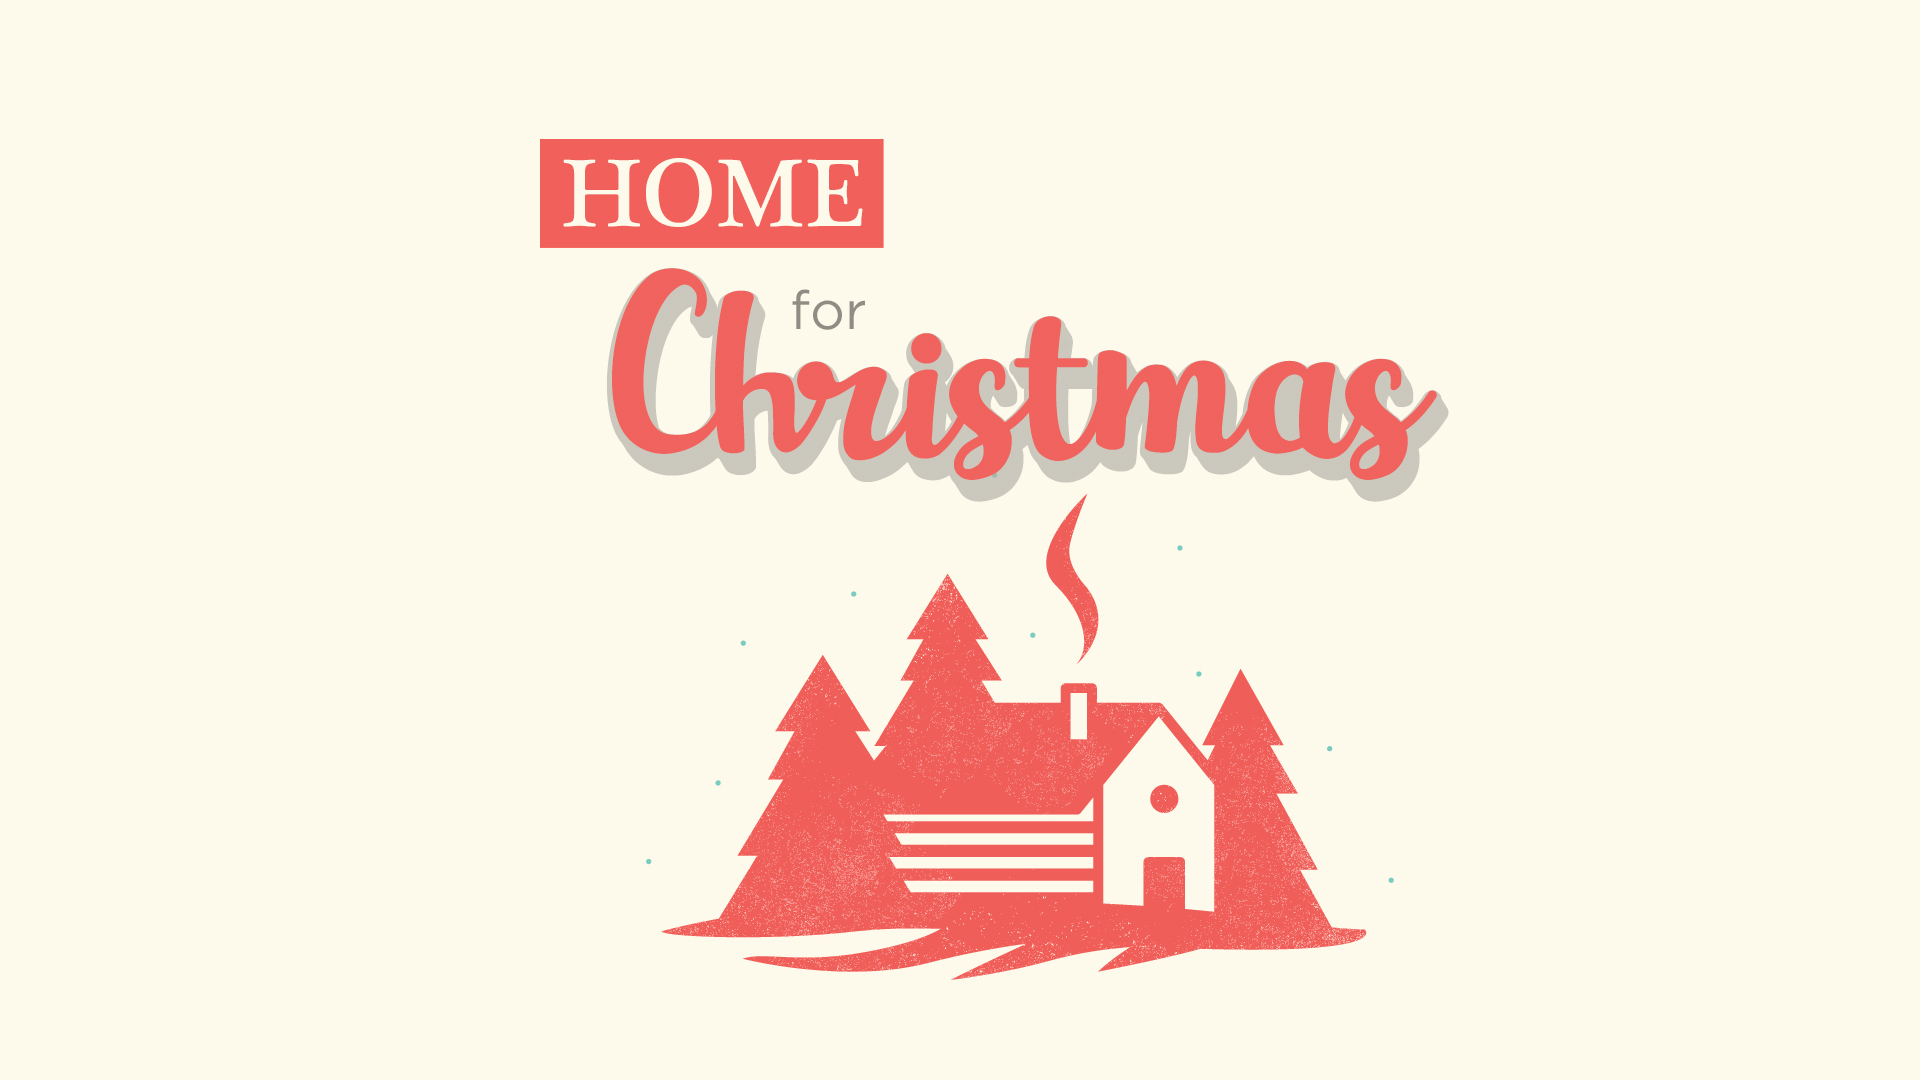 Home for Christmas – Part III